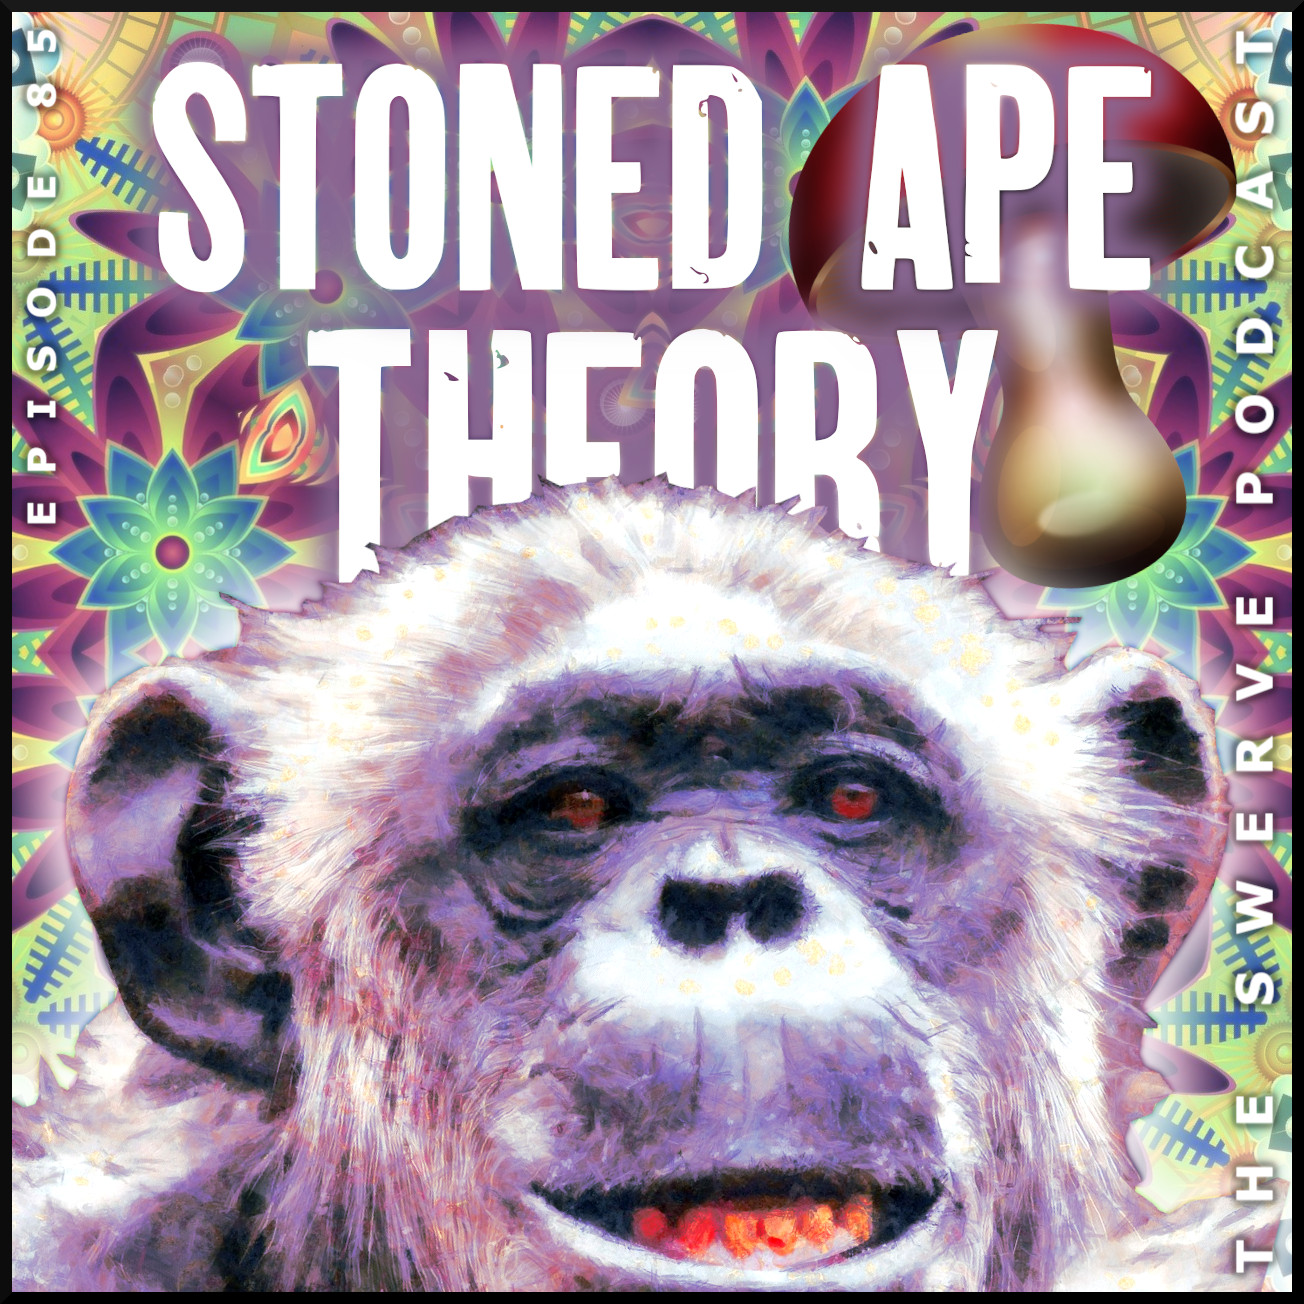 85_SToned_Ape_Theory_CoverArt